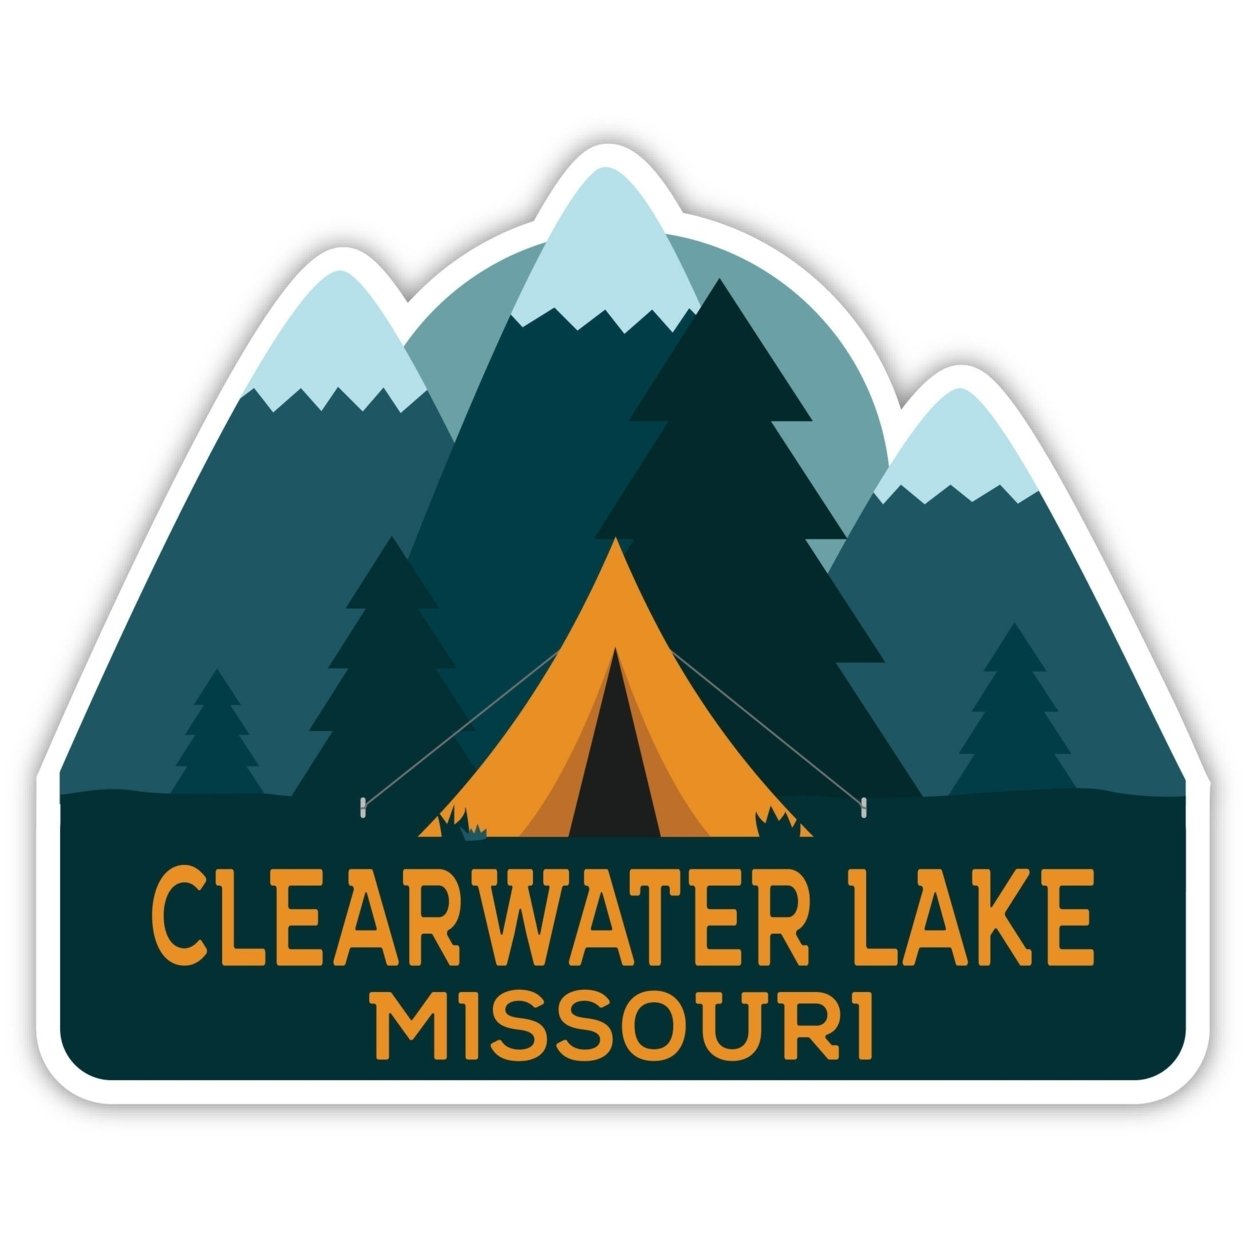 Clearwater Lake Missouri Souvenir Decorative Stickers (Choose Theme And Size) - 4-Pack, 4-Inch, Tent